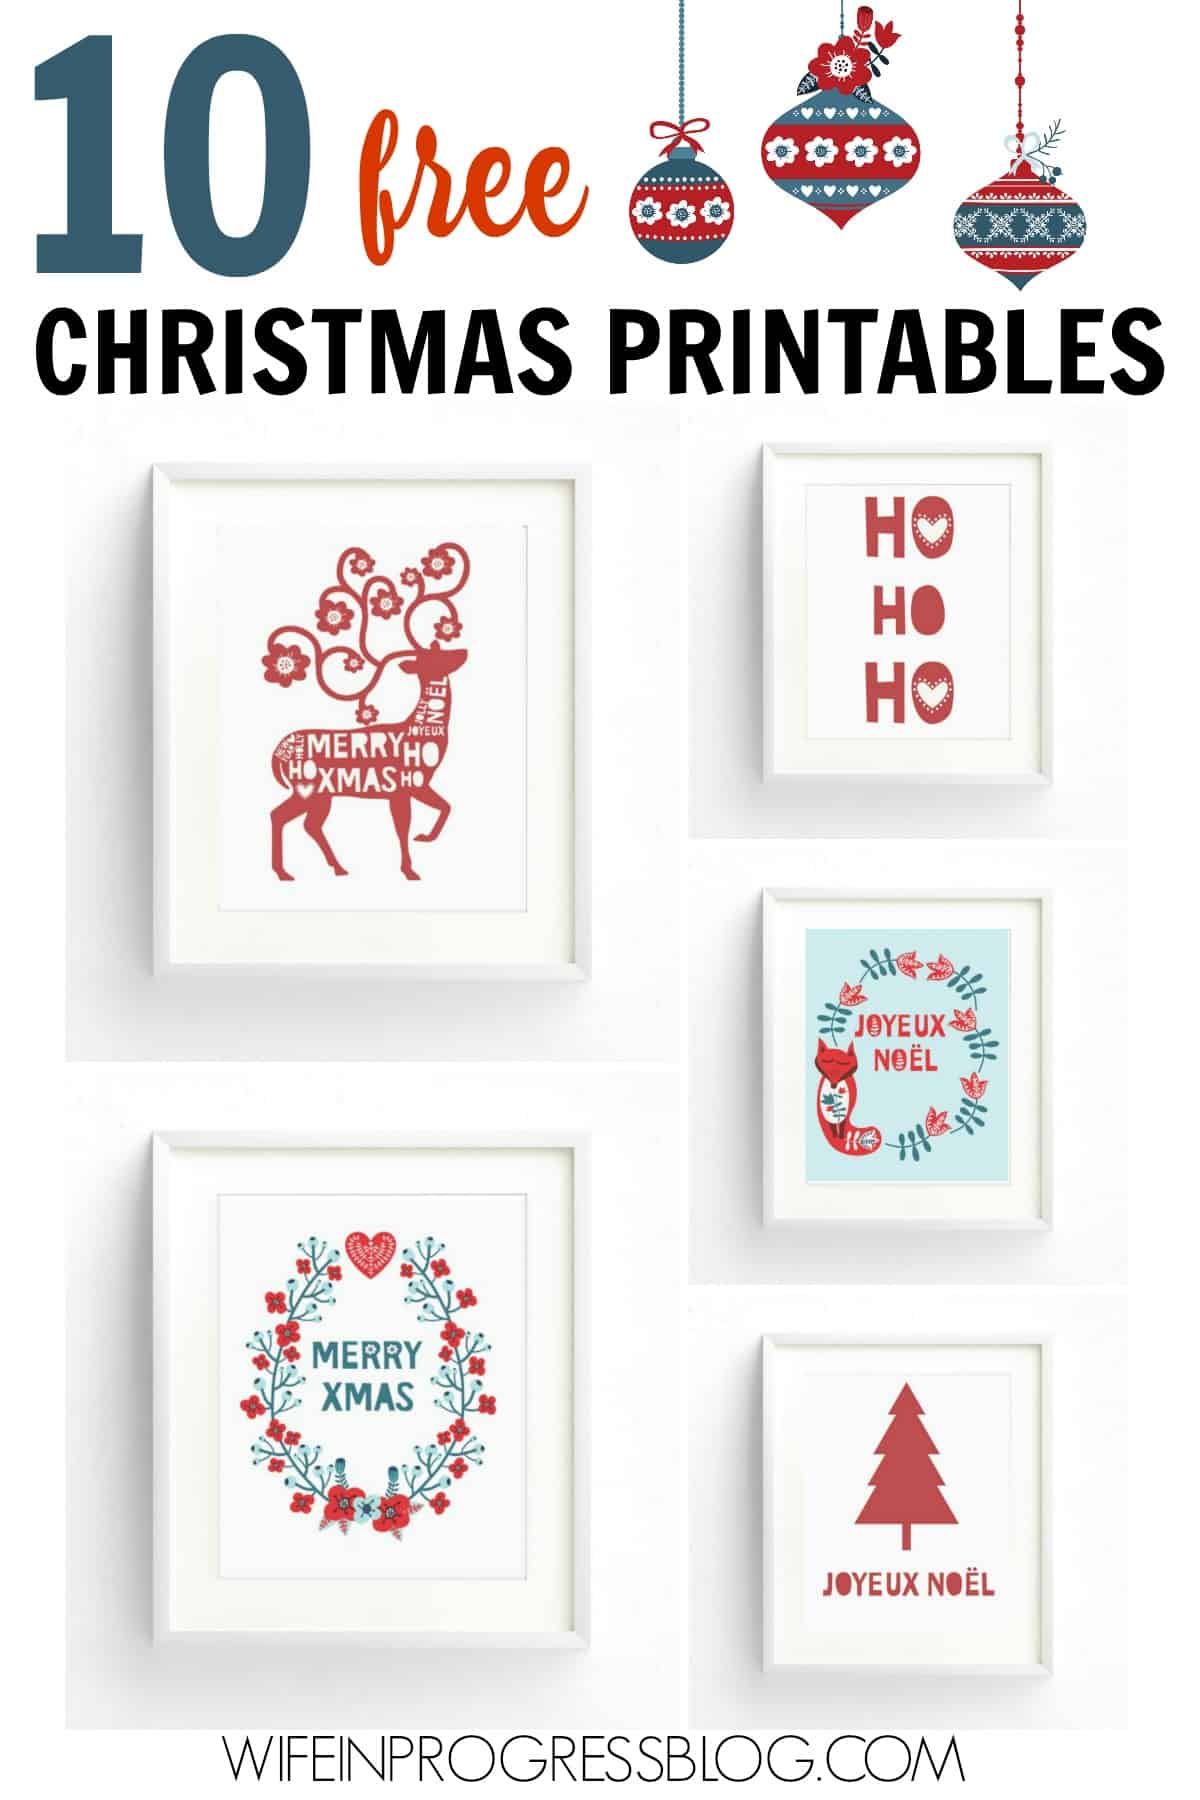 10 FREE Christmas printables for you. Just download and print for instant holiday decor!